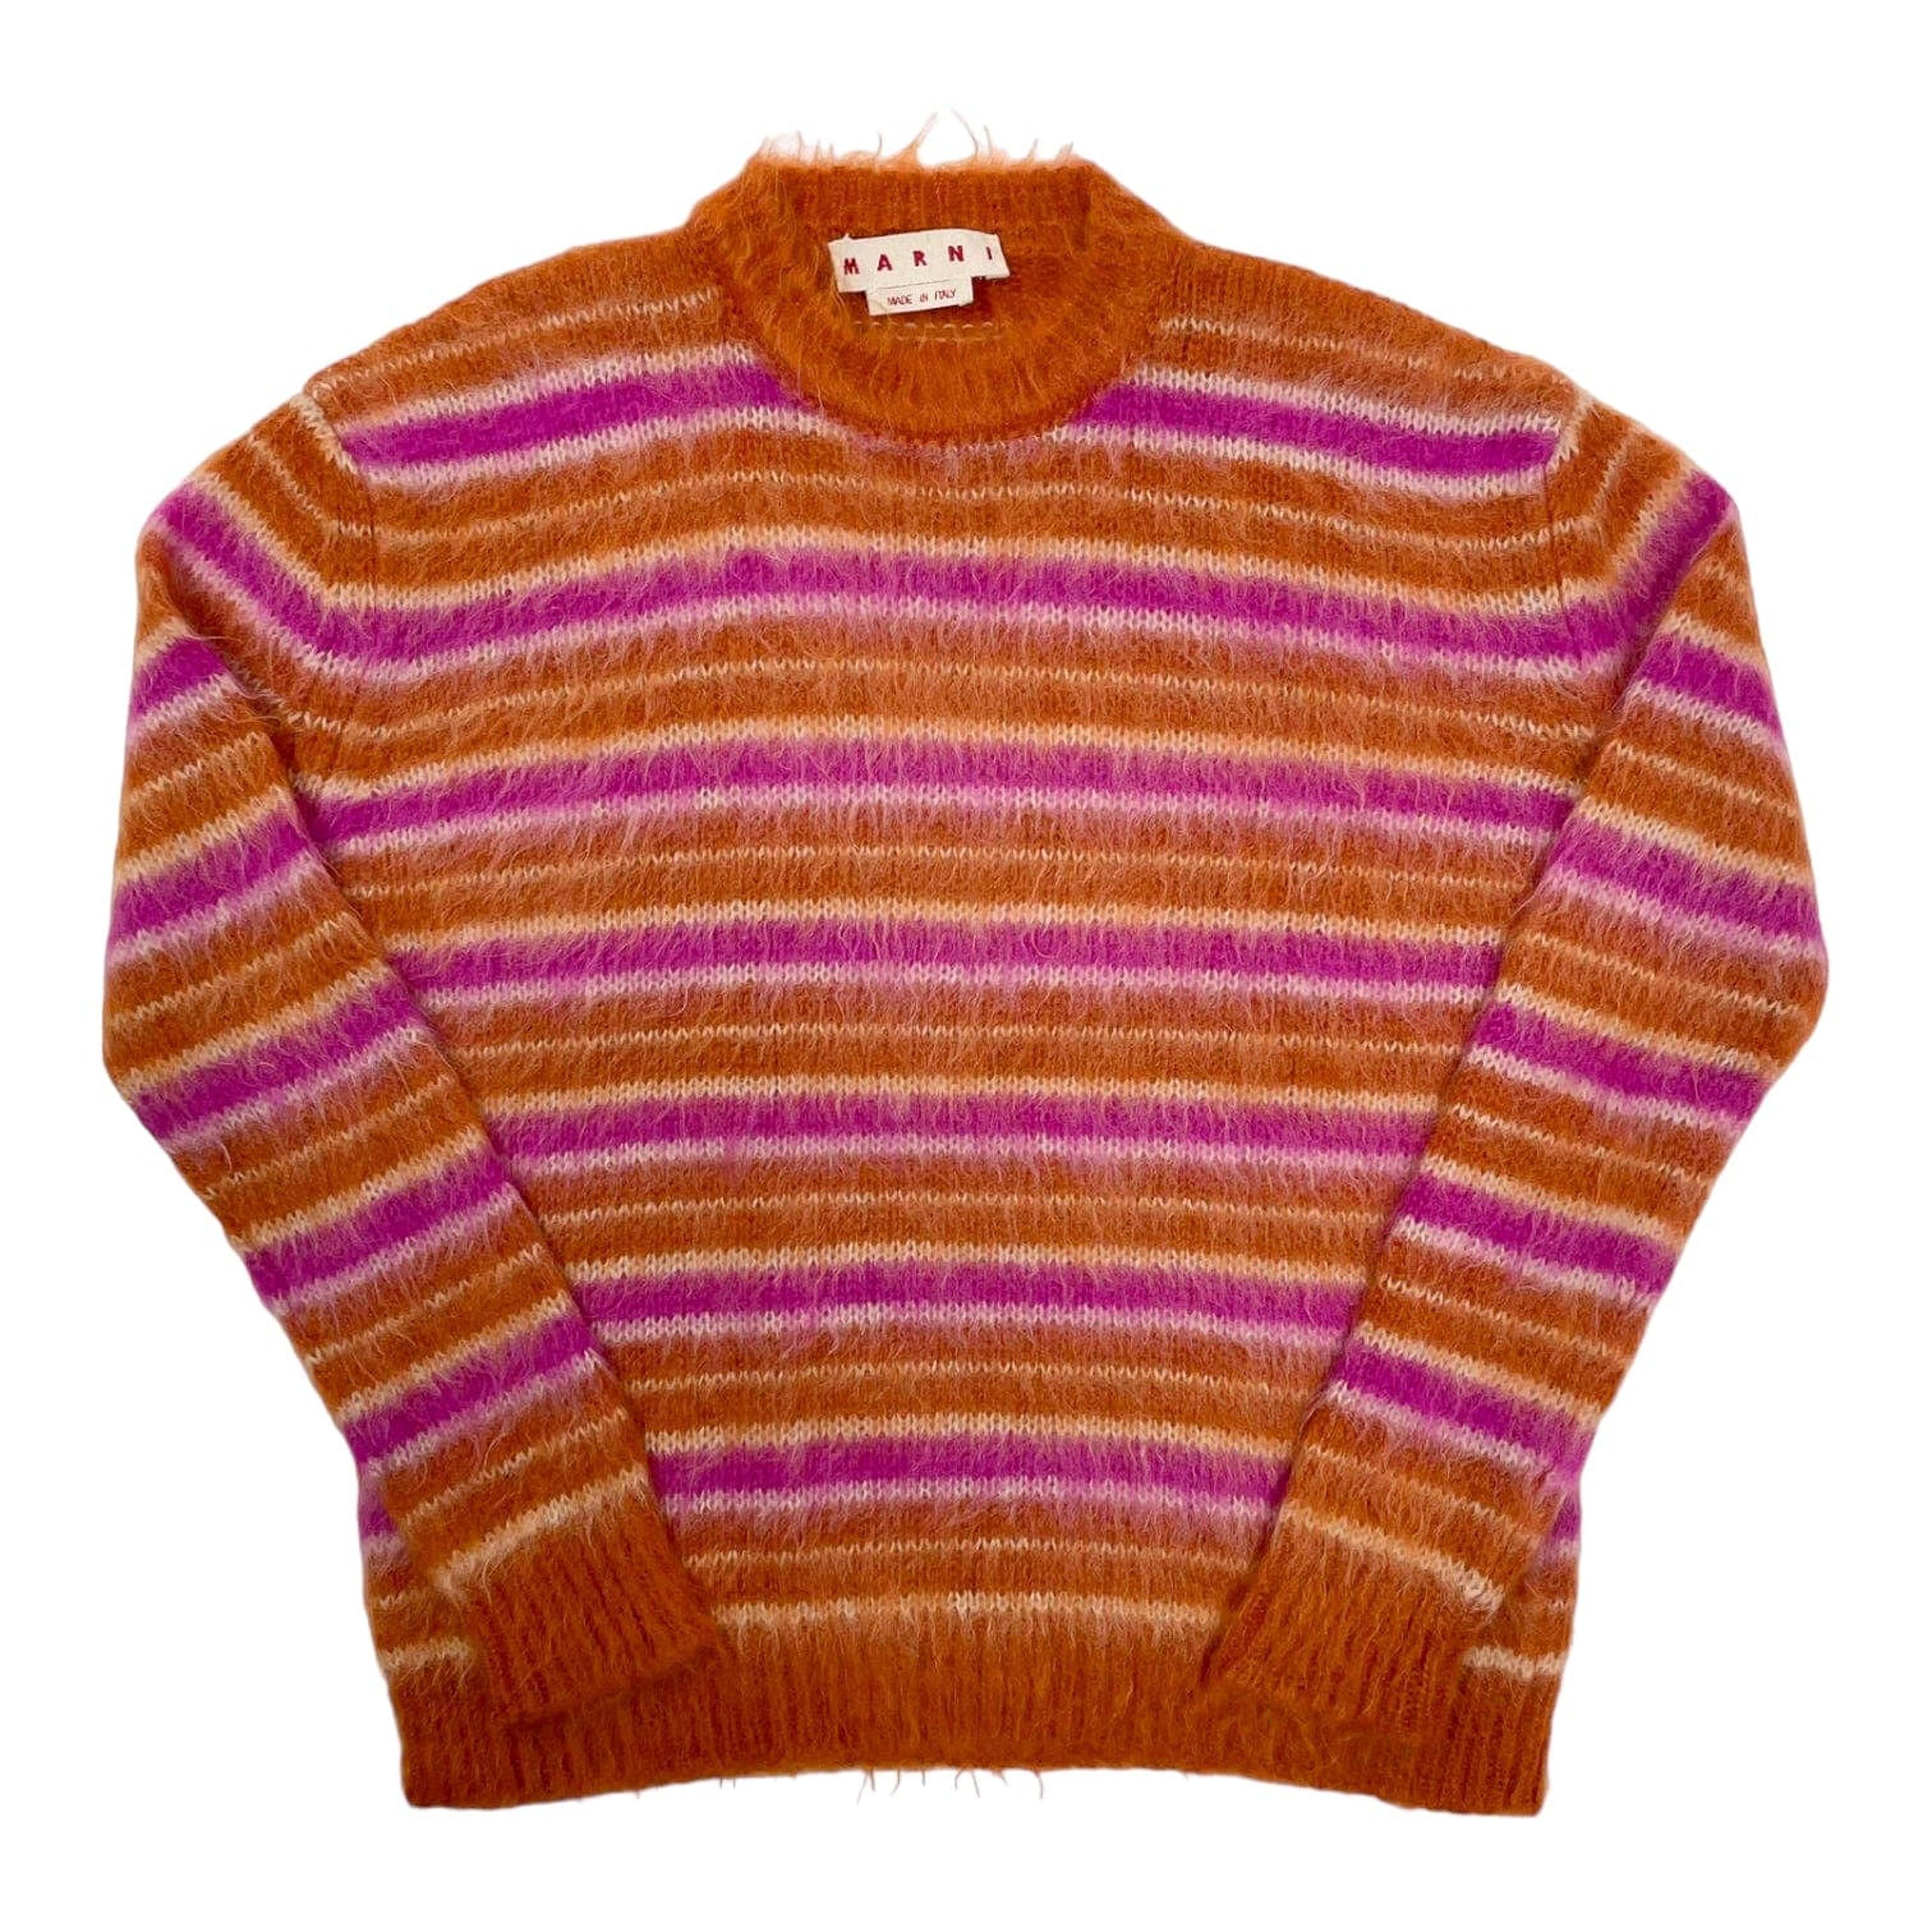 Marni Striped Mohair Knit Sweater Orange Pink Pre-Owned